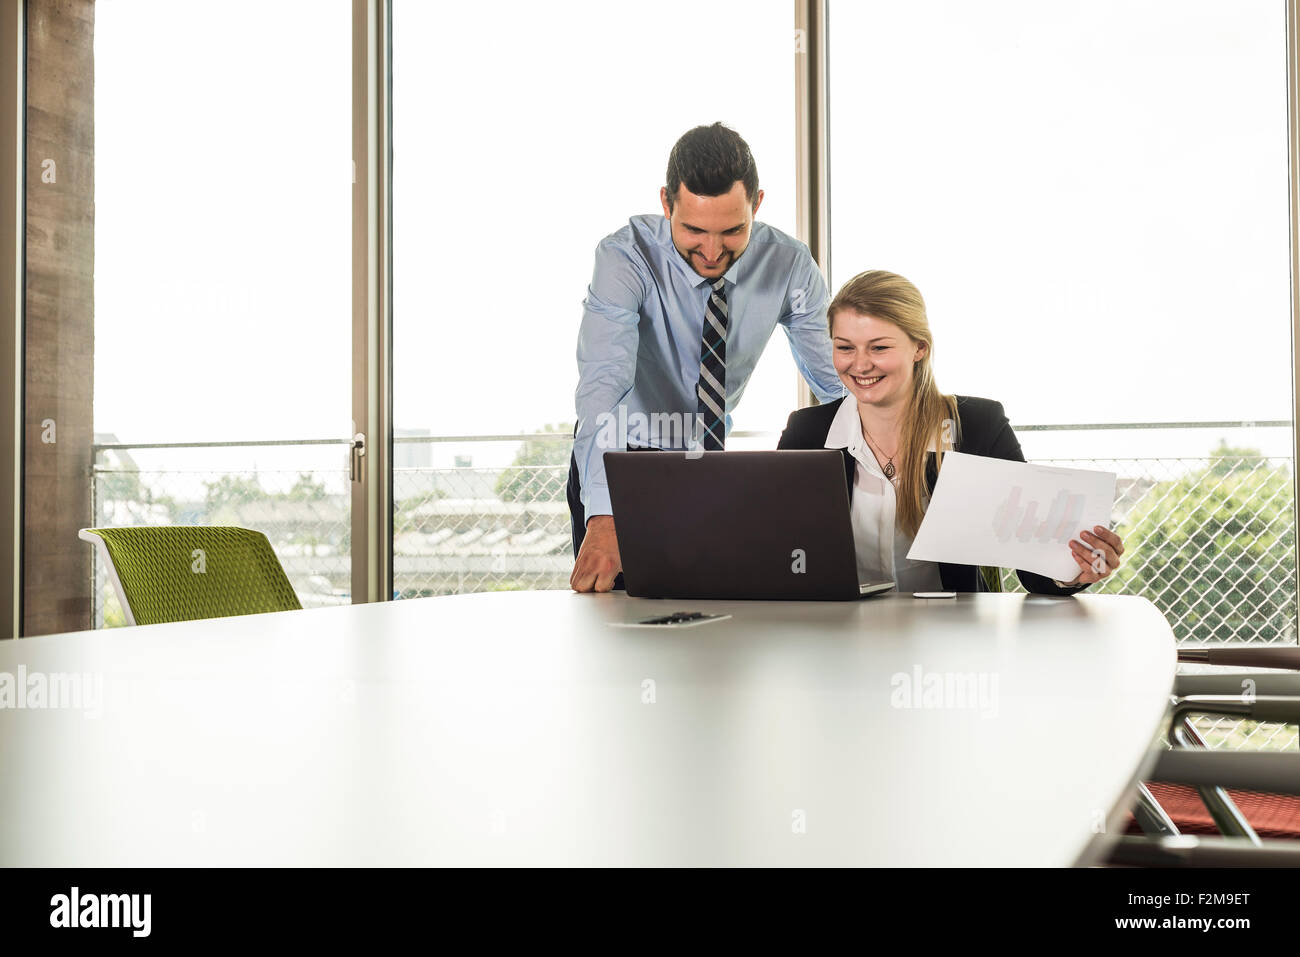 Smiling young businessman and businesswoman in conference room with laptop Stock Photo